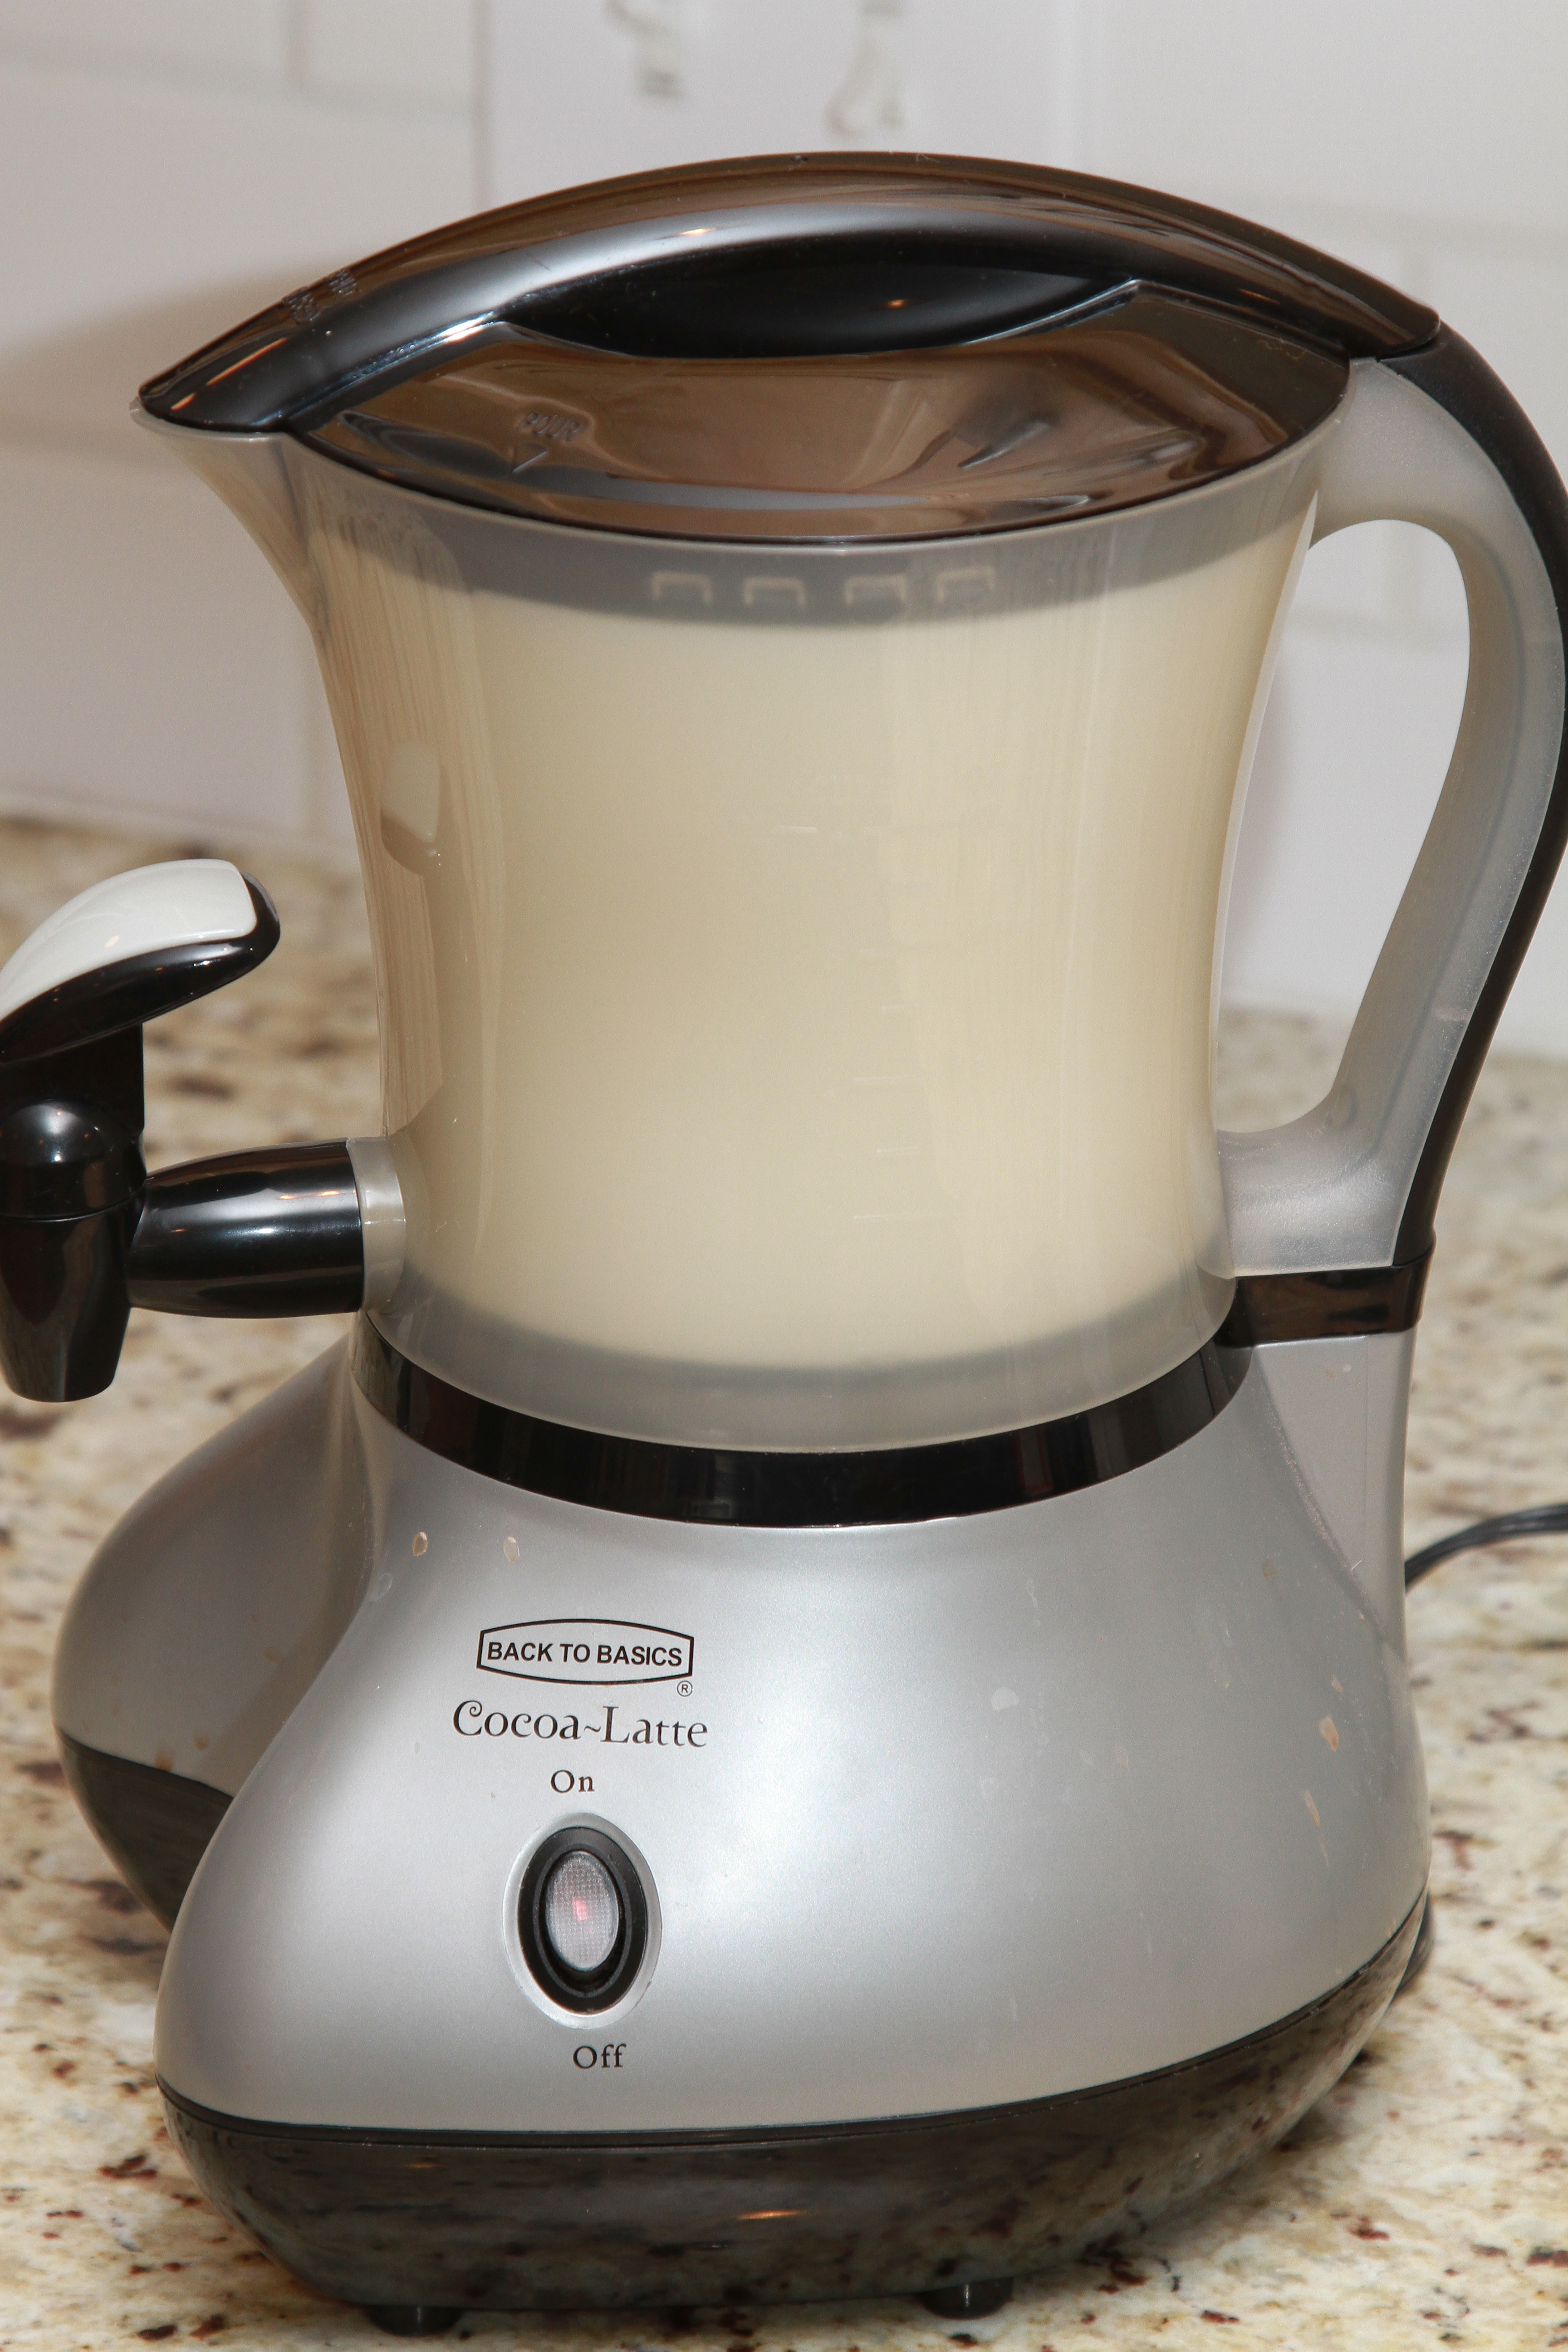  Cocoa Latte Hot Drink Maker By Back to Basics: Home & Kitchen